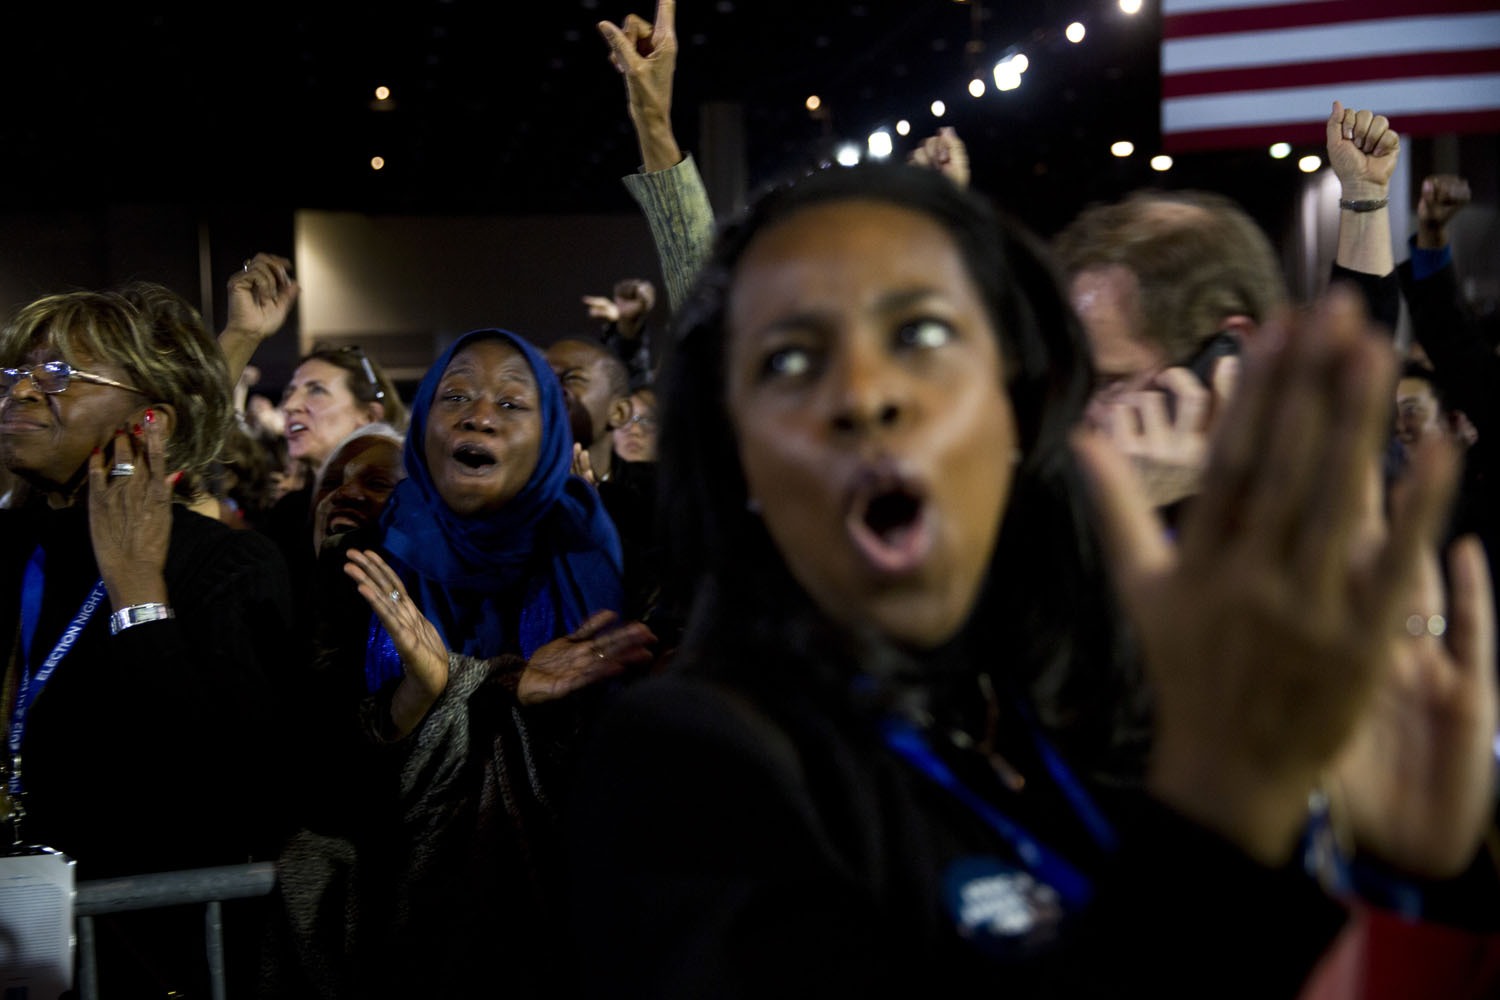 Image: Nov. 6, 2012. Supporters cheer during President Obama's election night event at the McCormick Place Lakeside Center in Chicago.